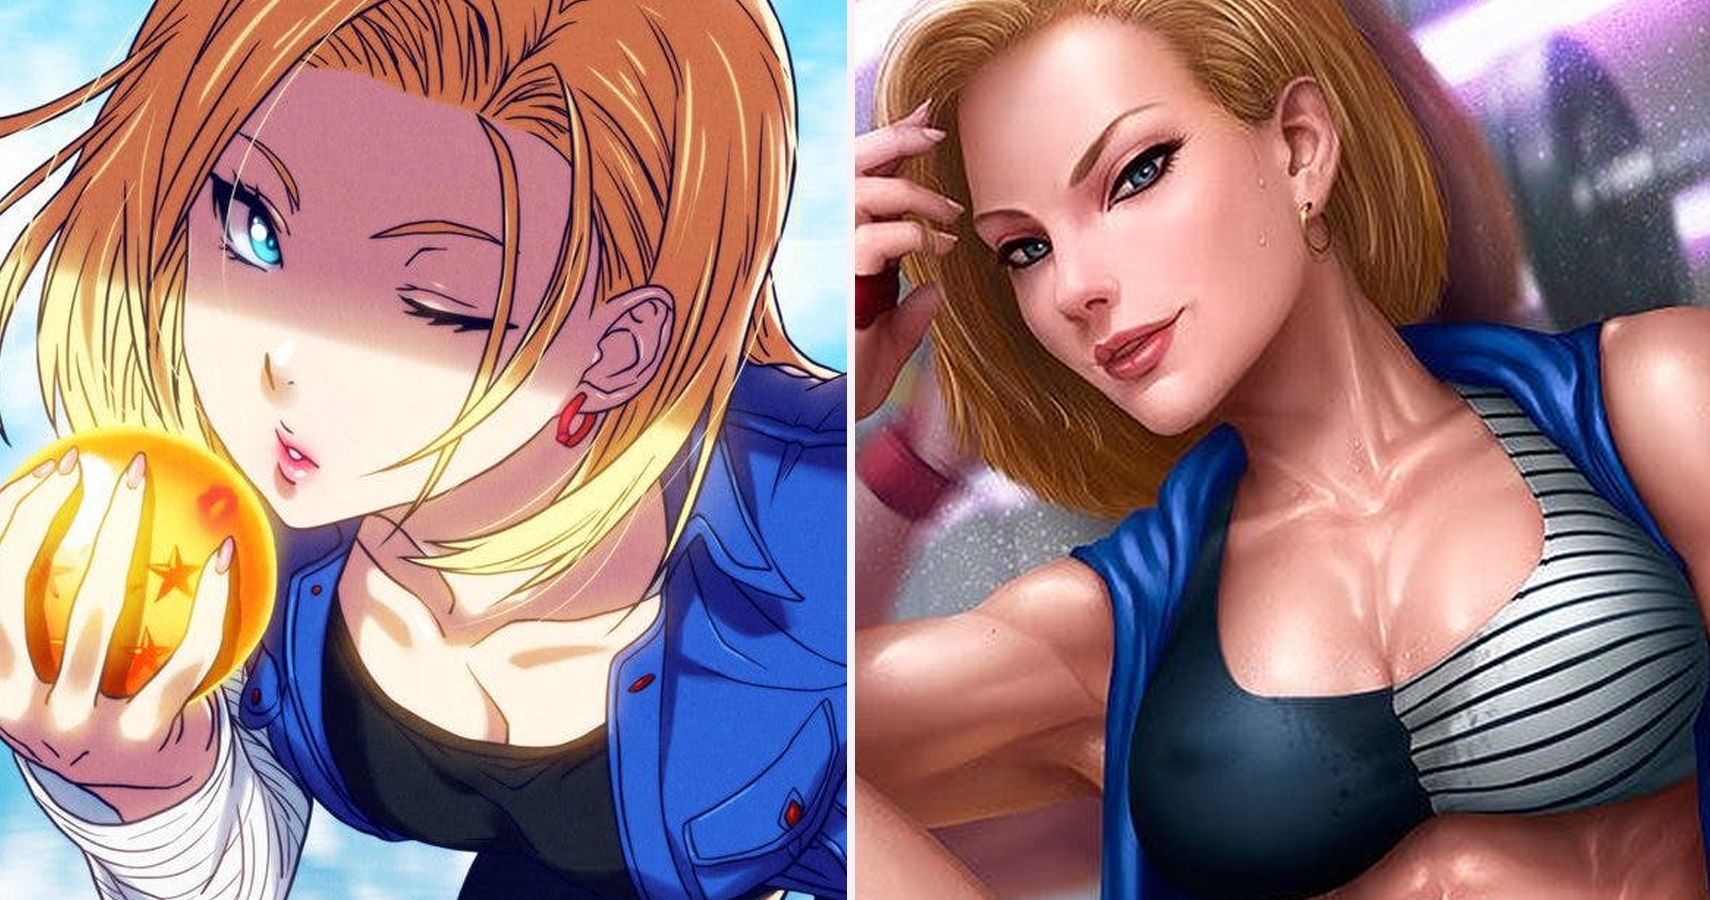 Android 18 turns good